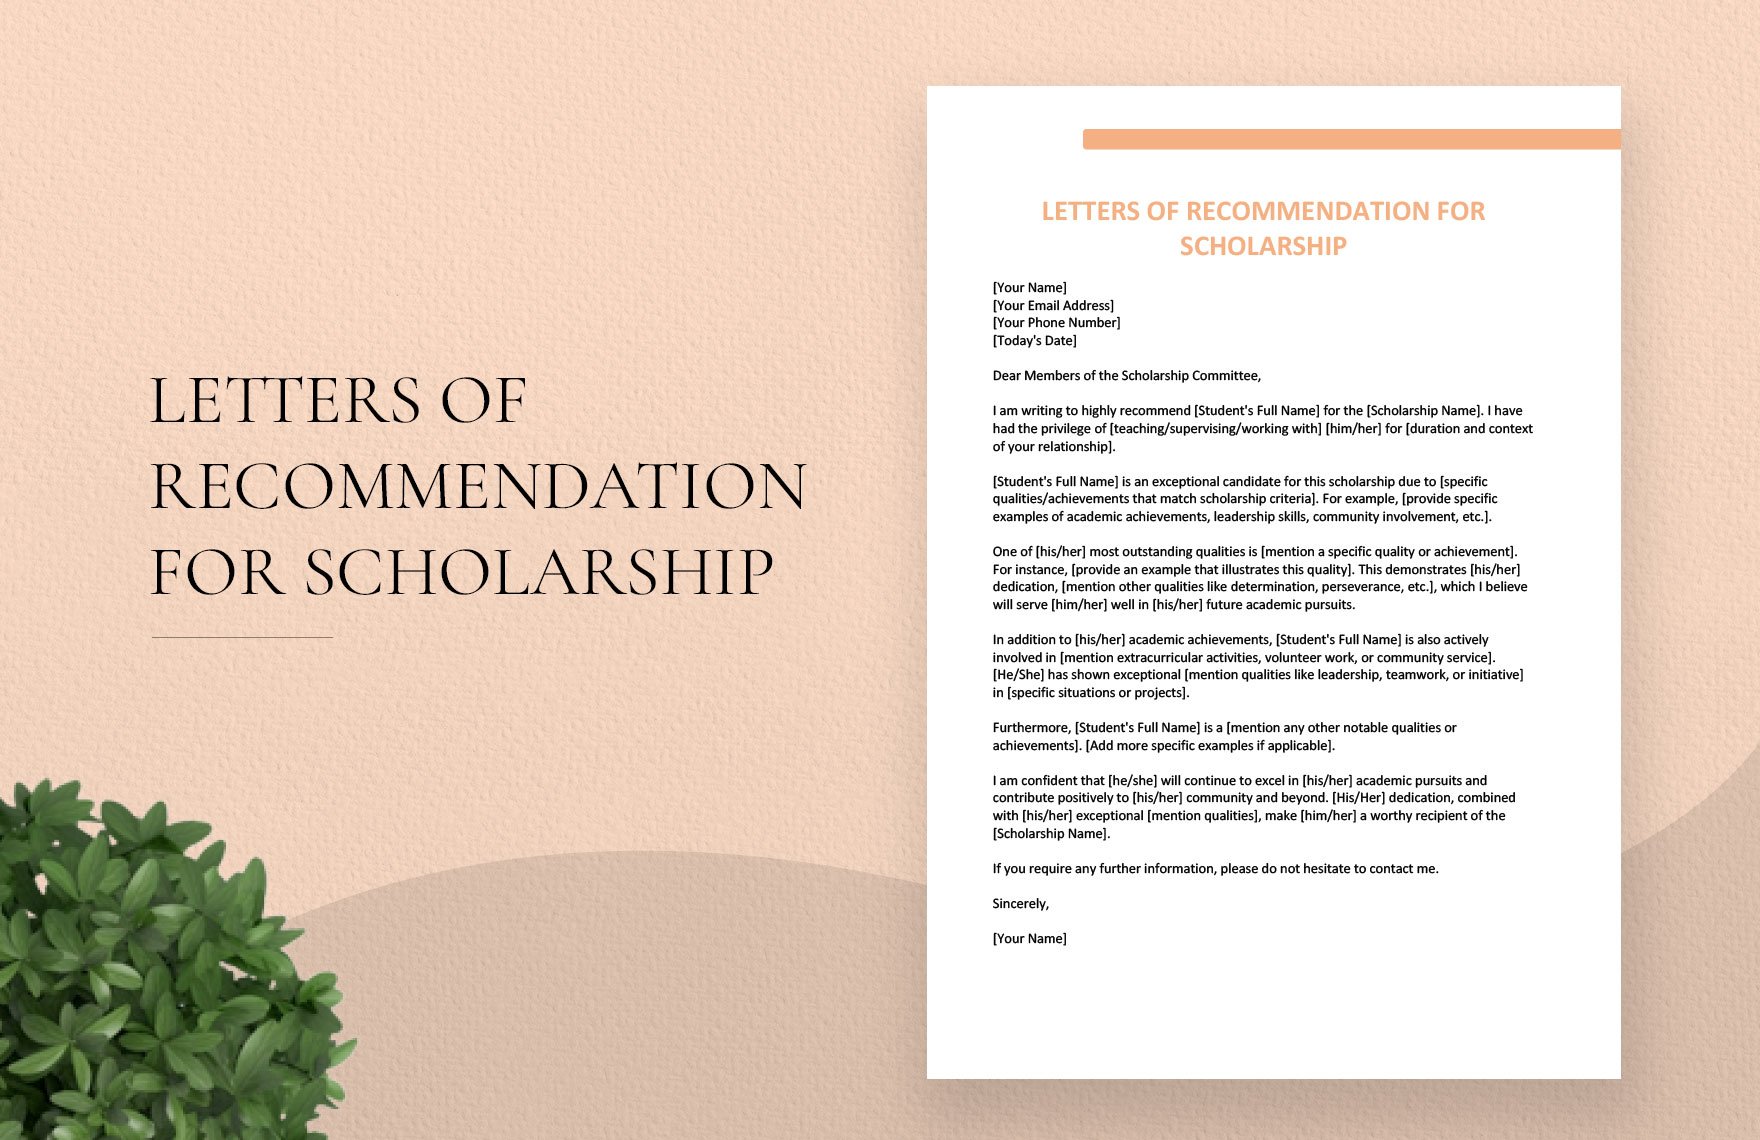 Letters of Recommendation for Scholarship